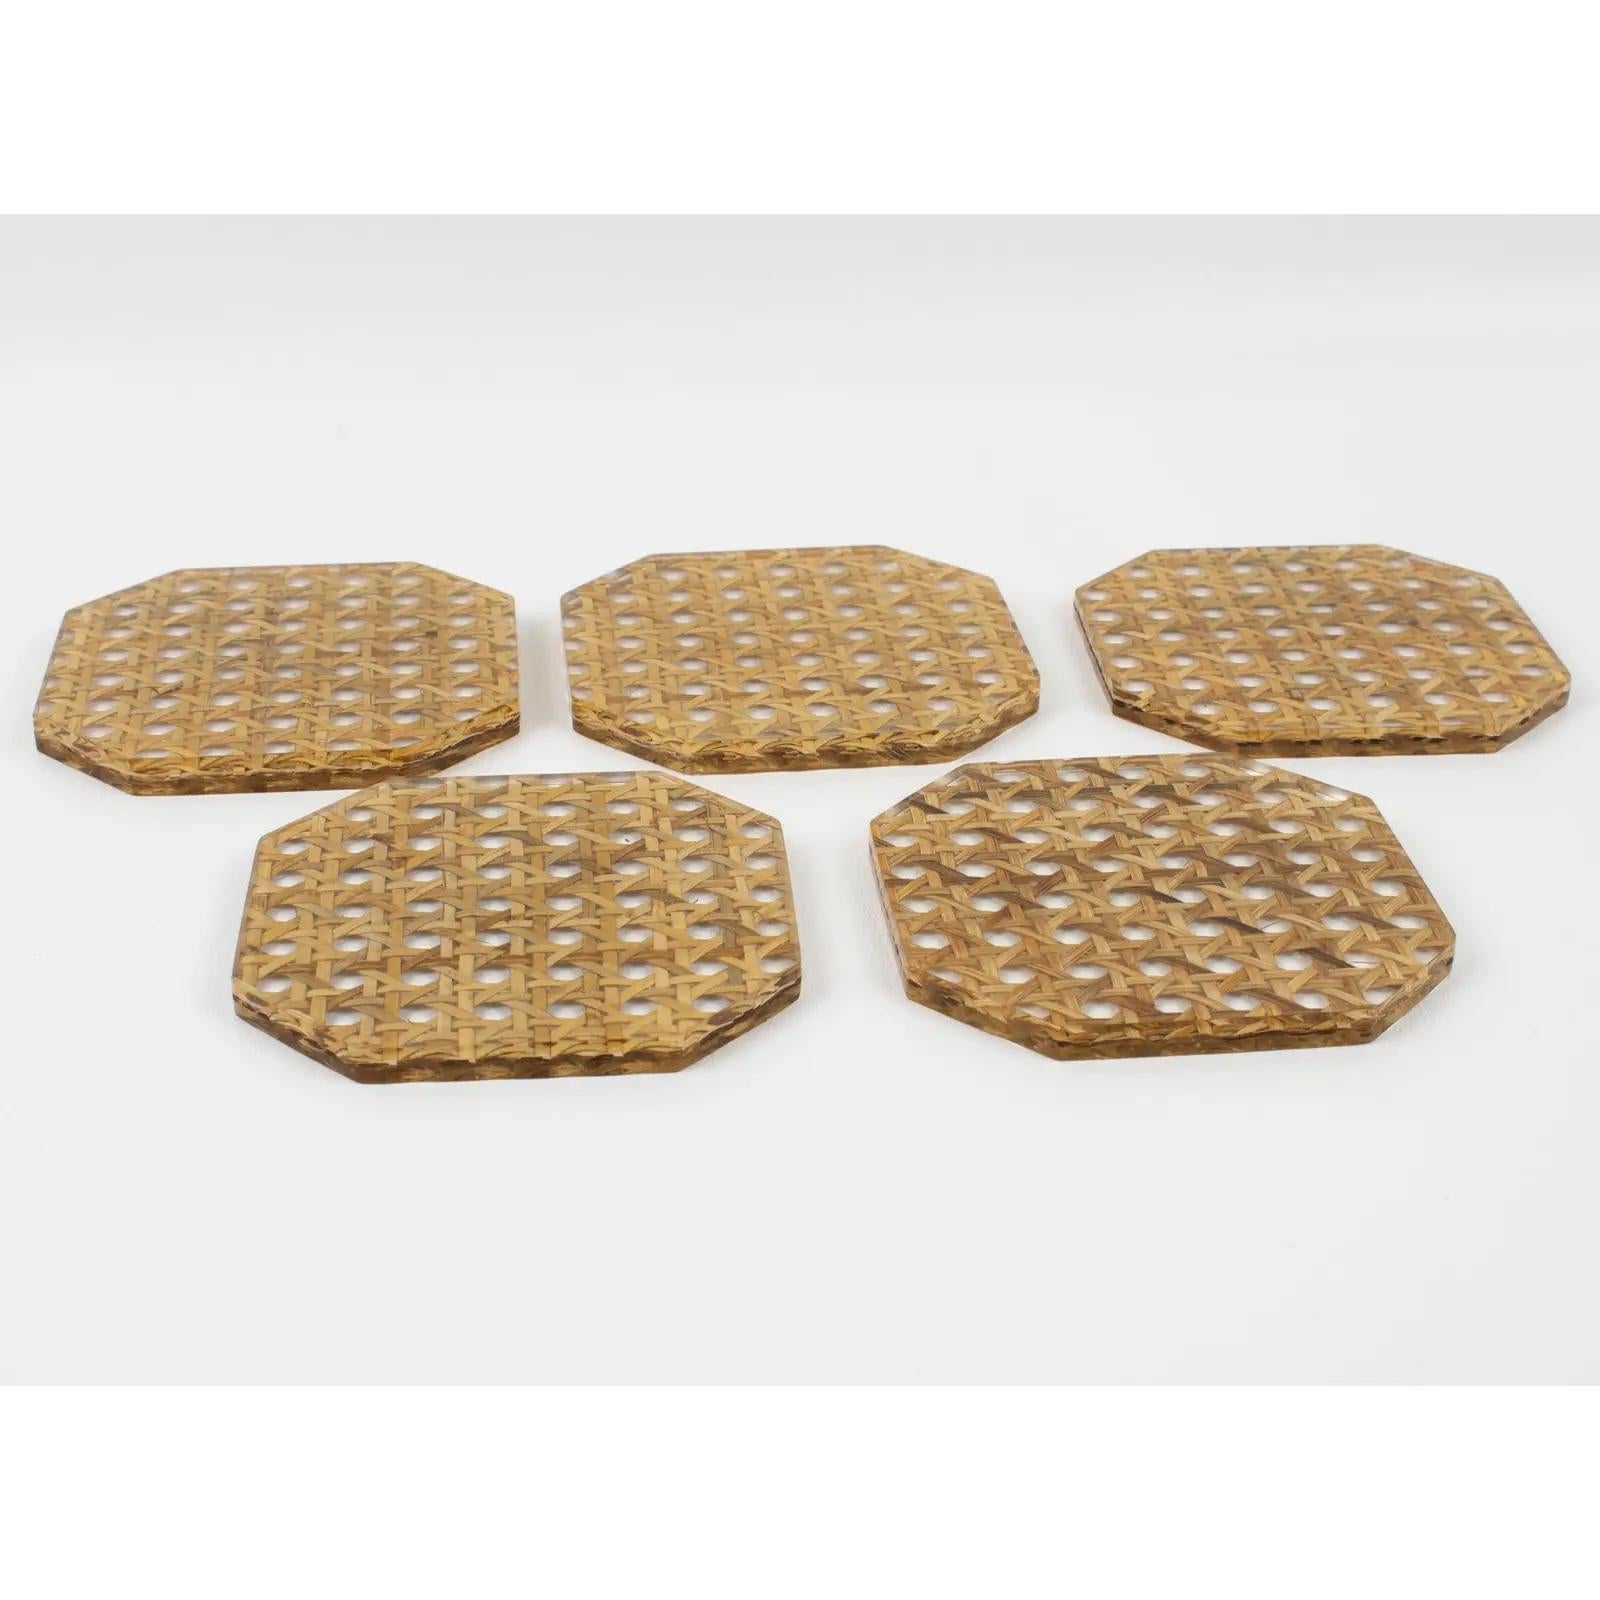 French Christian Dior Lucite and Rattan Barware Coasters, set of 5 pieces For Sale